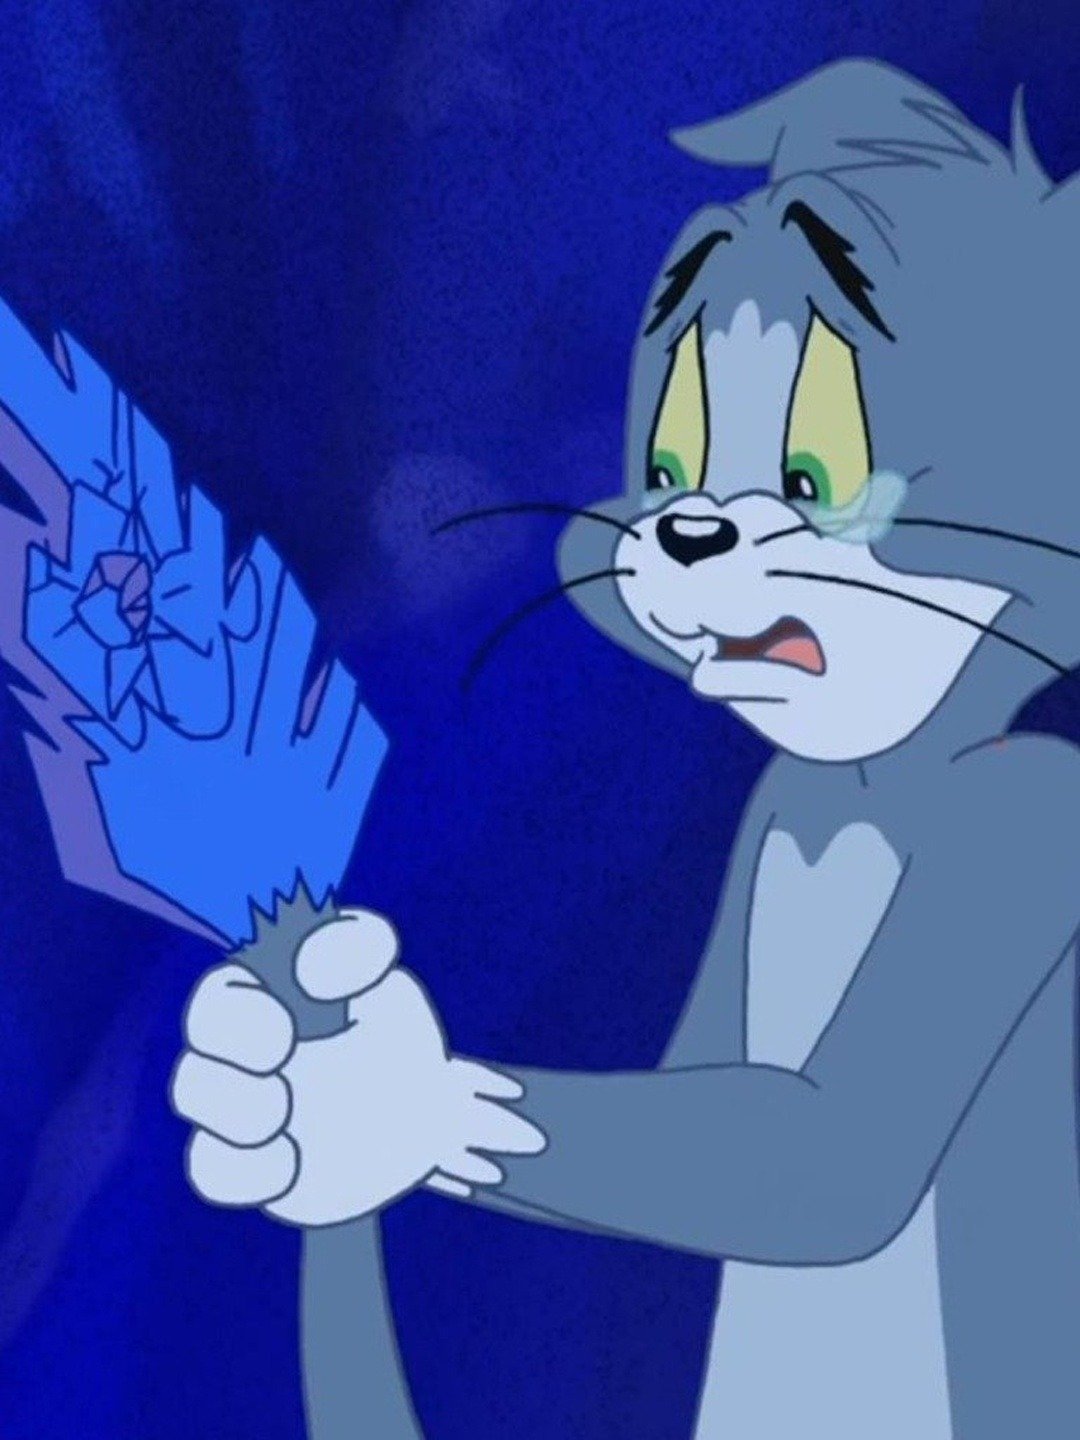 Tom and Jerry Tales - Rotten Tomatoes